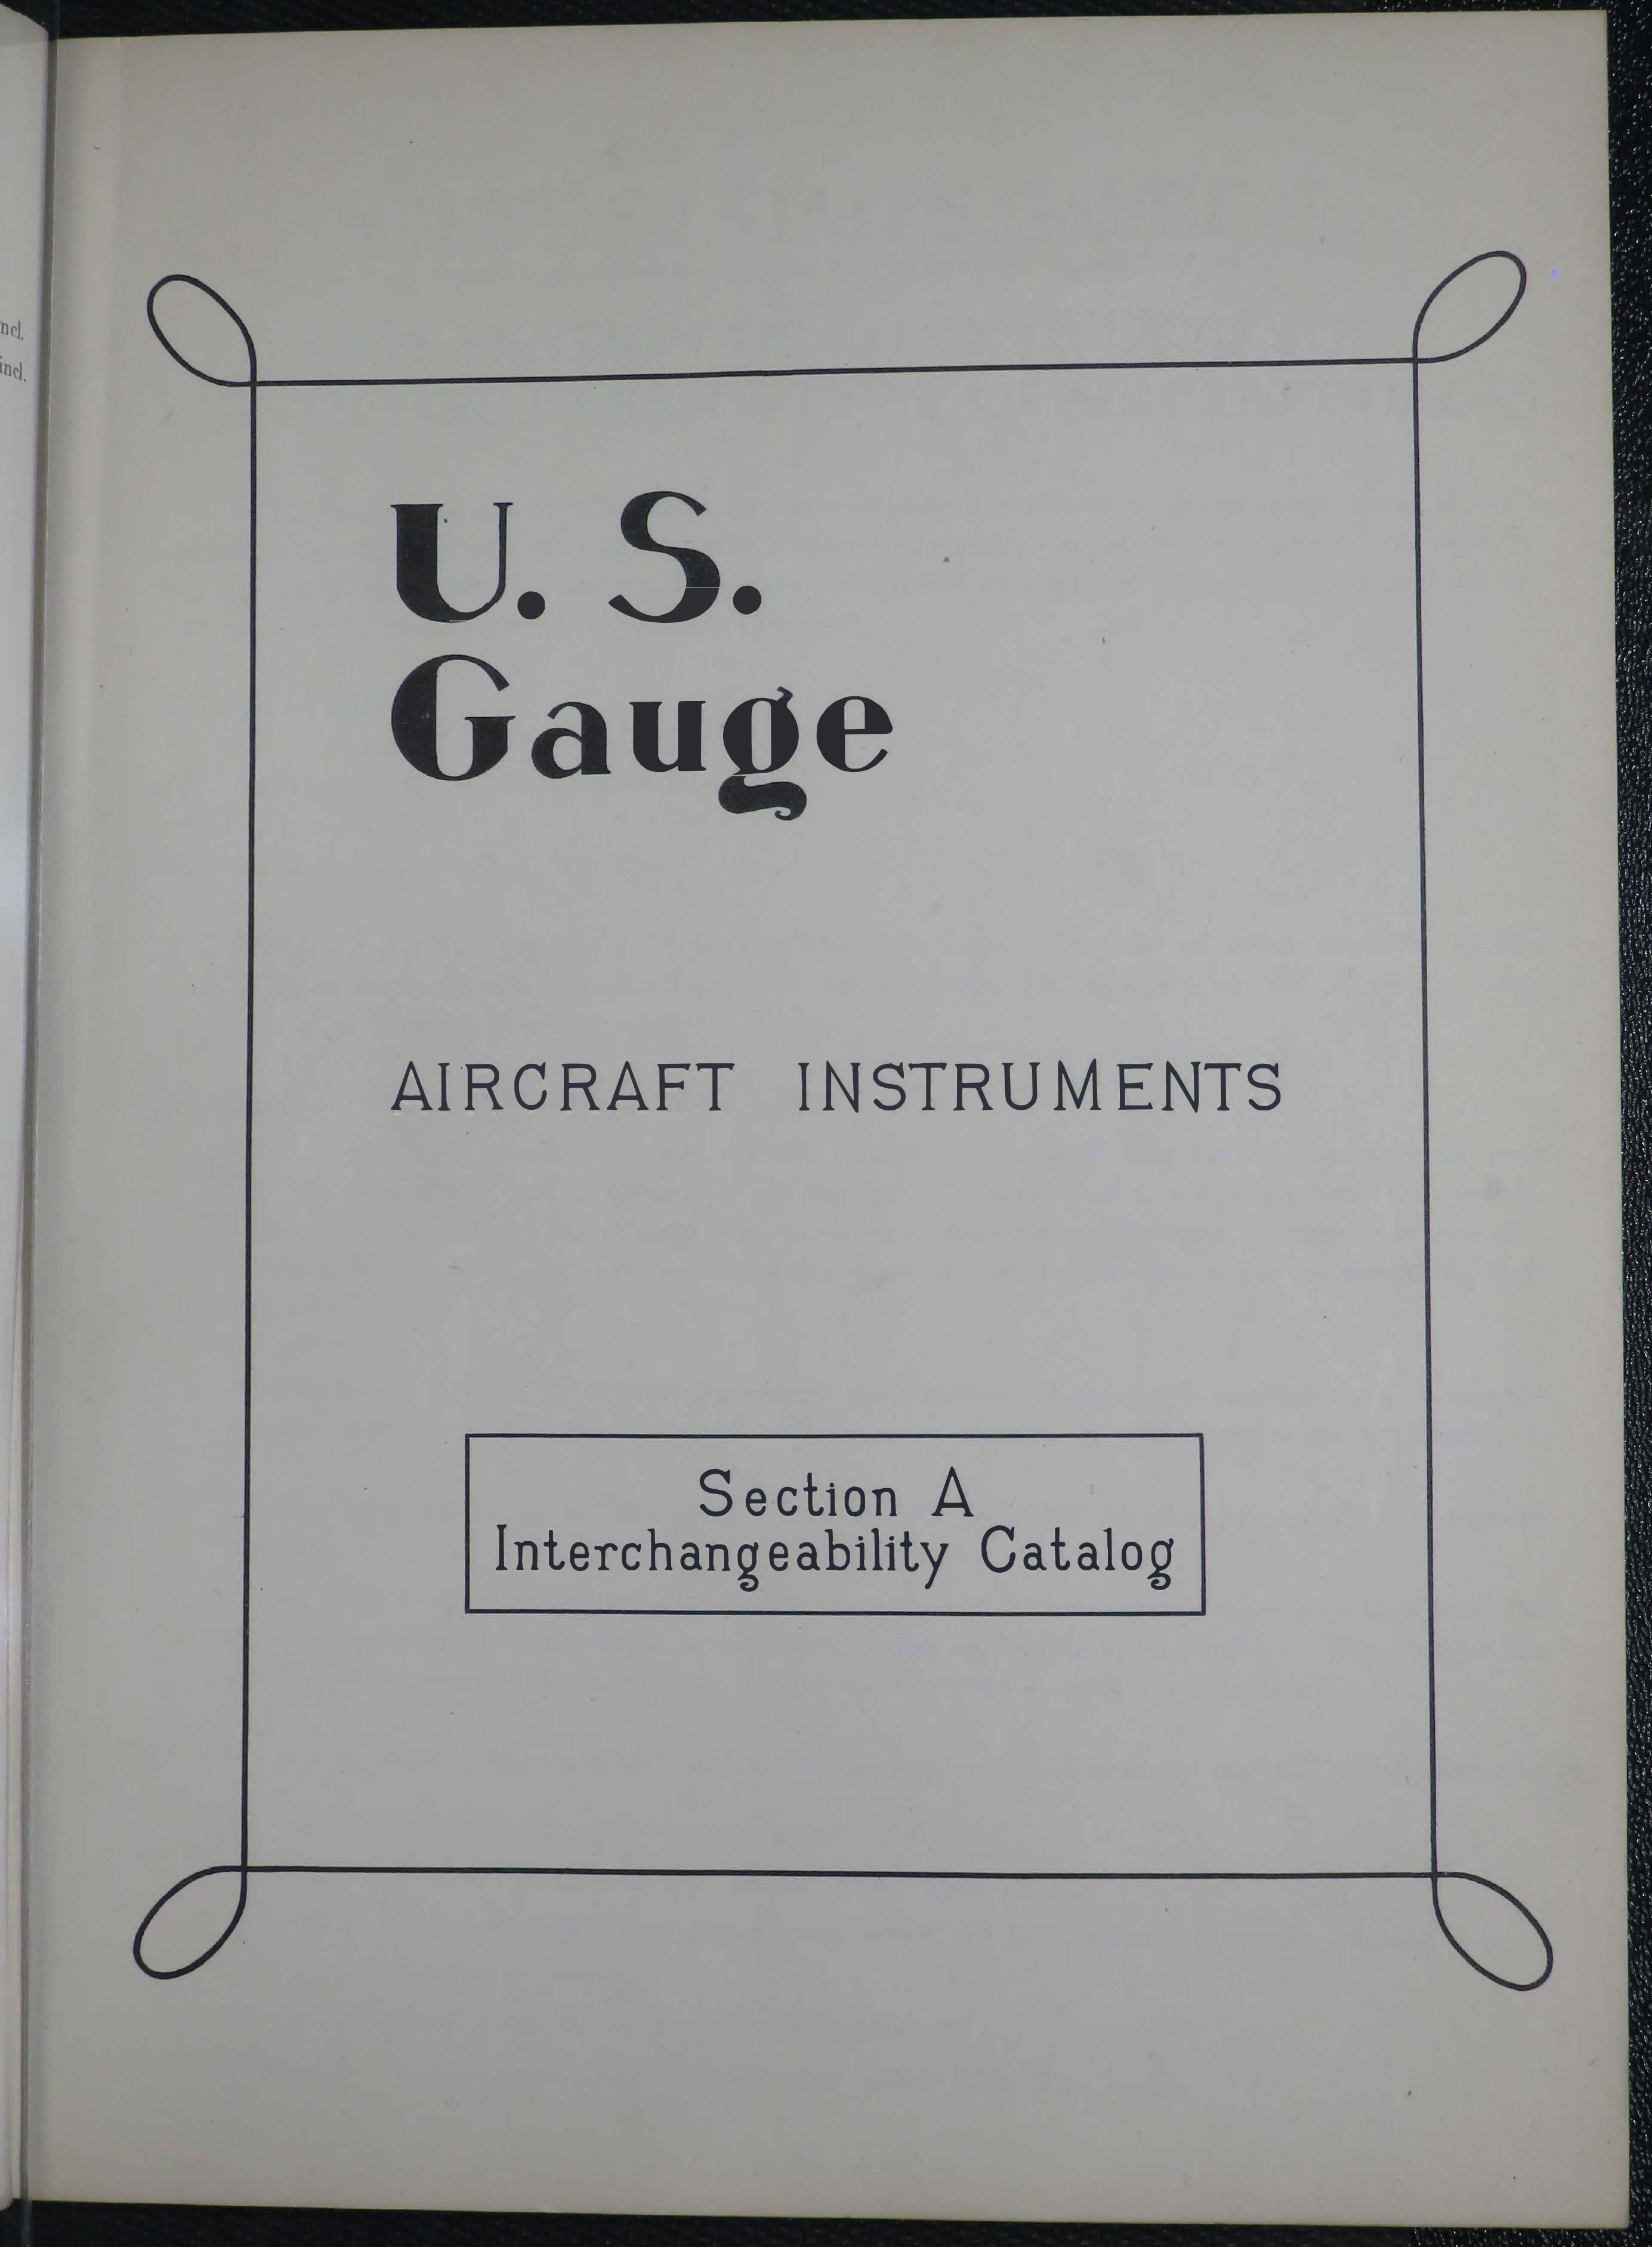 Sample page 5 from AirCorps Library document: Aircraft Instruments, Interchangeability Catalog Section A